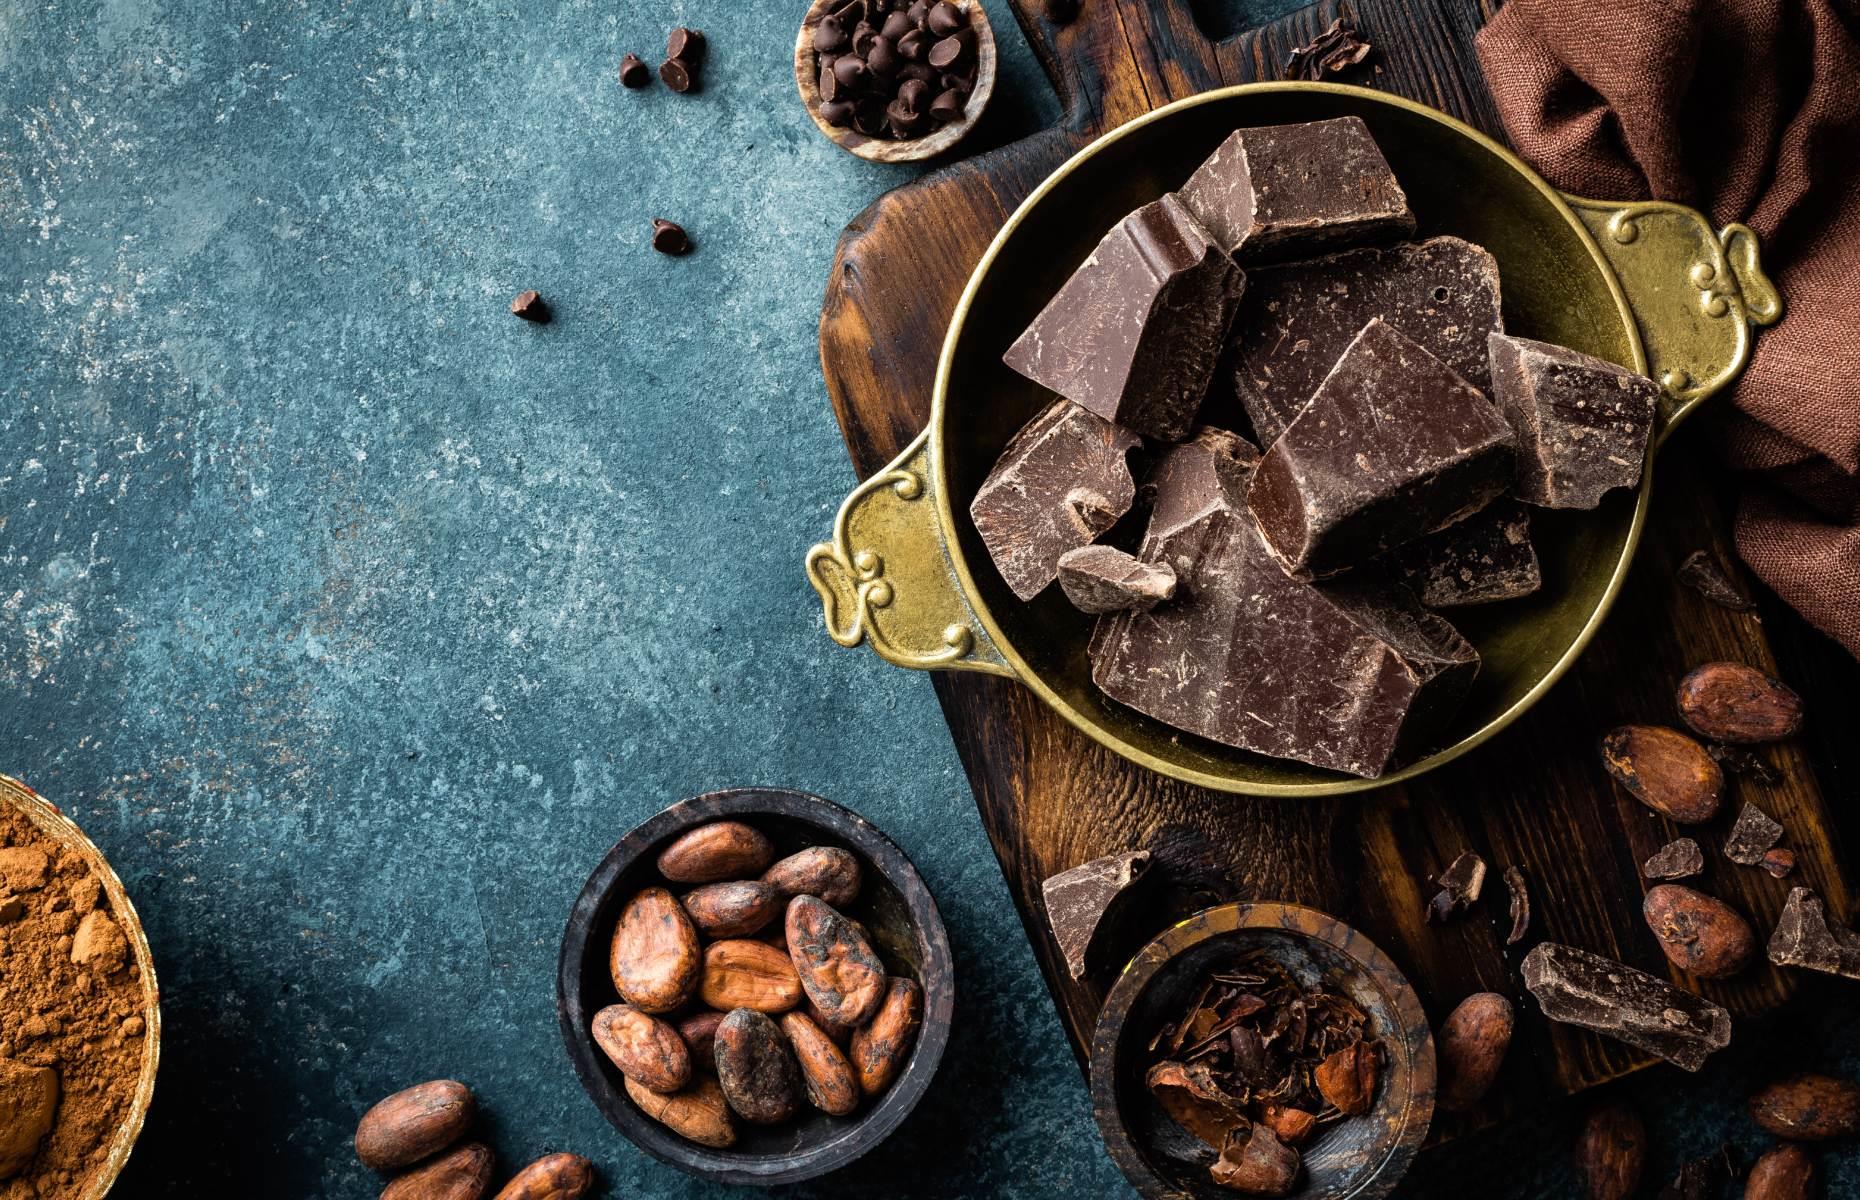 <p>We’ve come full circle when it comes to dark chocolate. As in the Maya and Aztec civilisations, both its bitterness and its apparent health benefits are prized – some believe that regularly consuming dark chocolate can help lower blood pressure. However, experts do also warn that chocolate contains a lot of fat and should be consumed in moderation.</p>